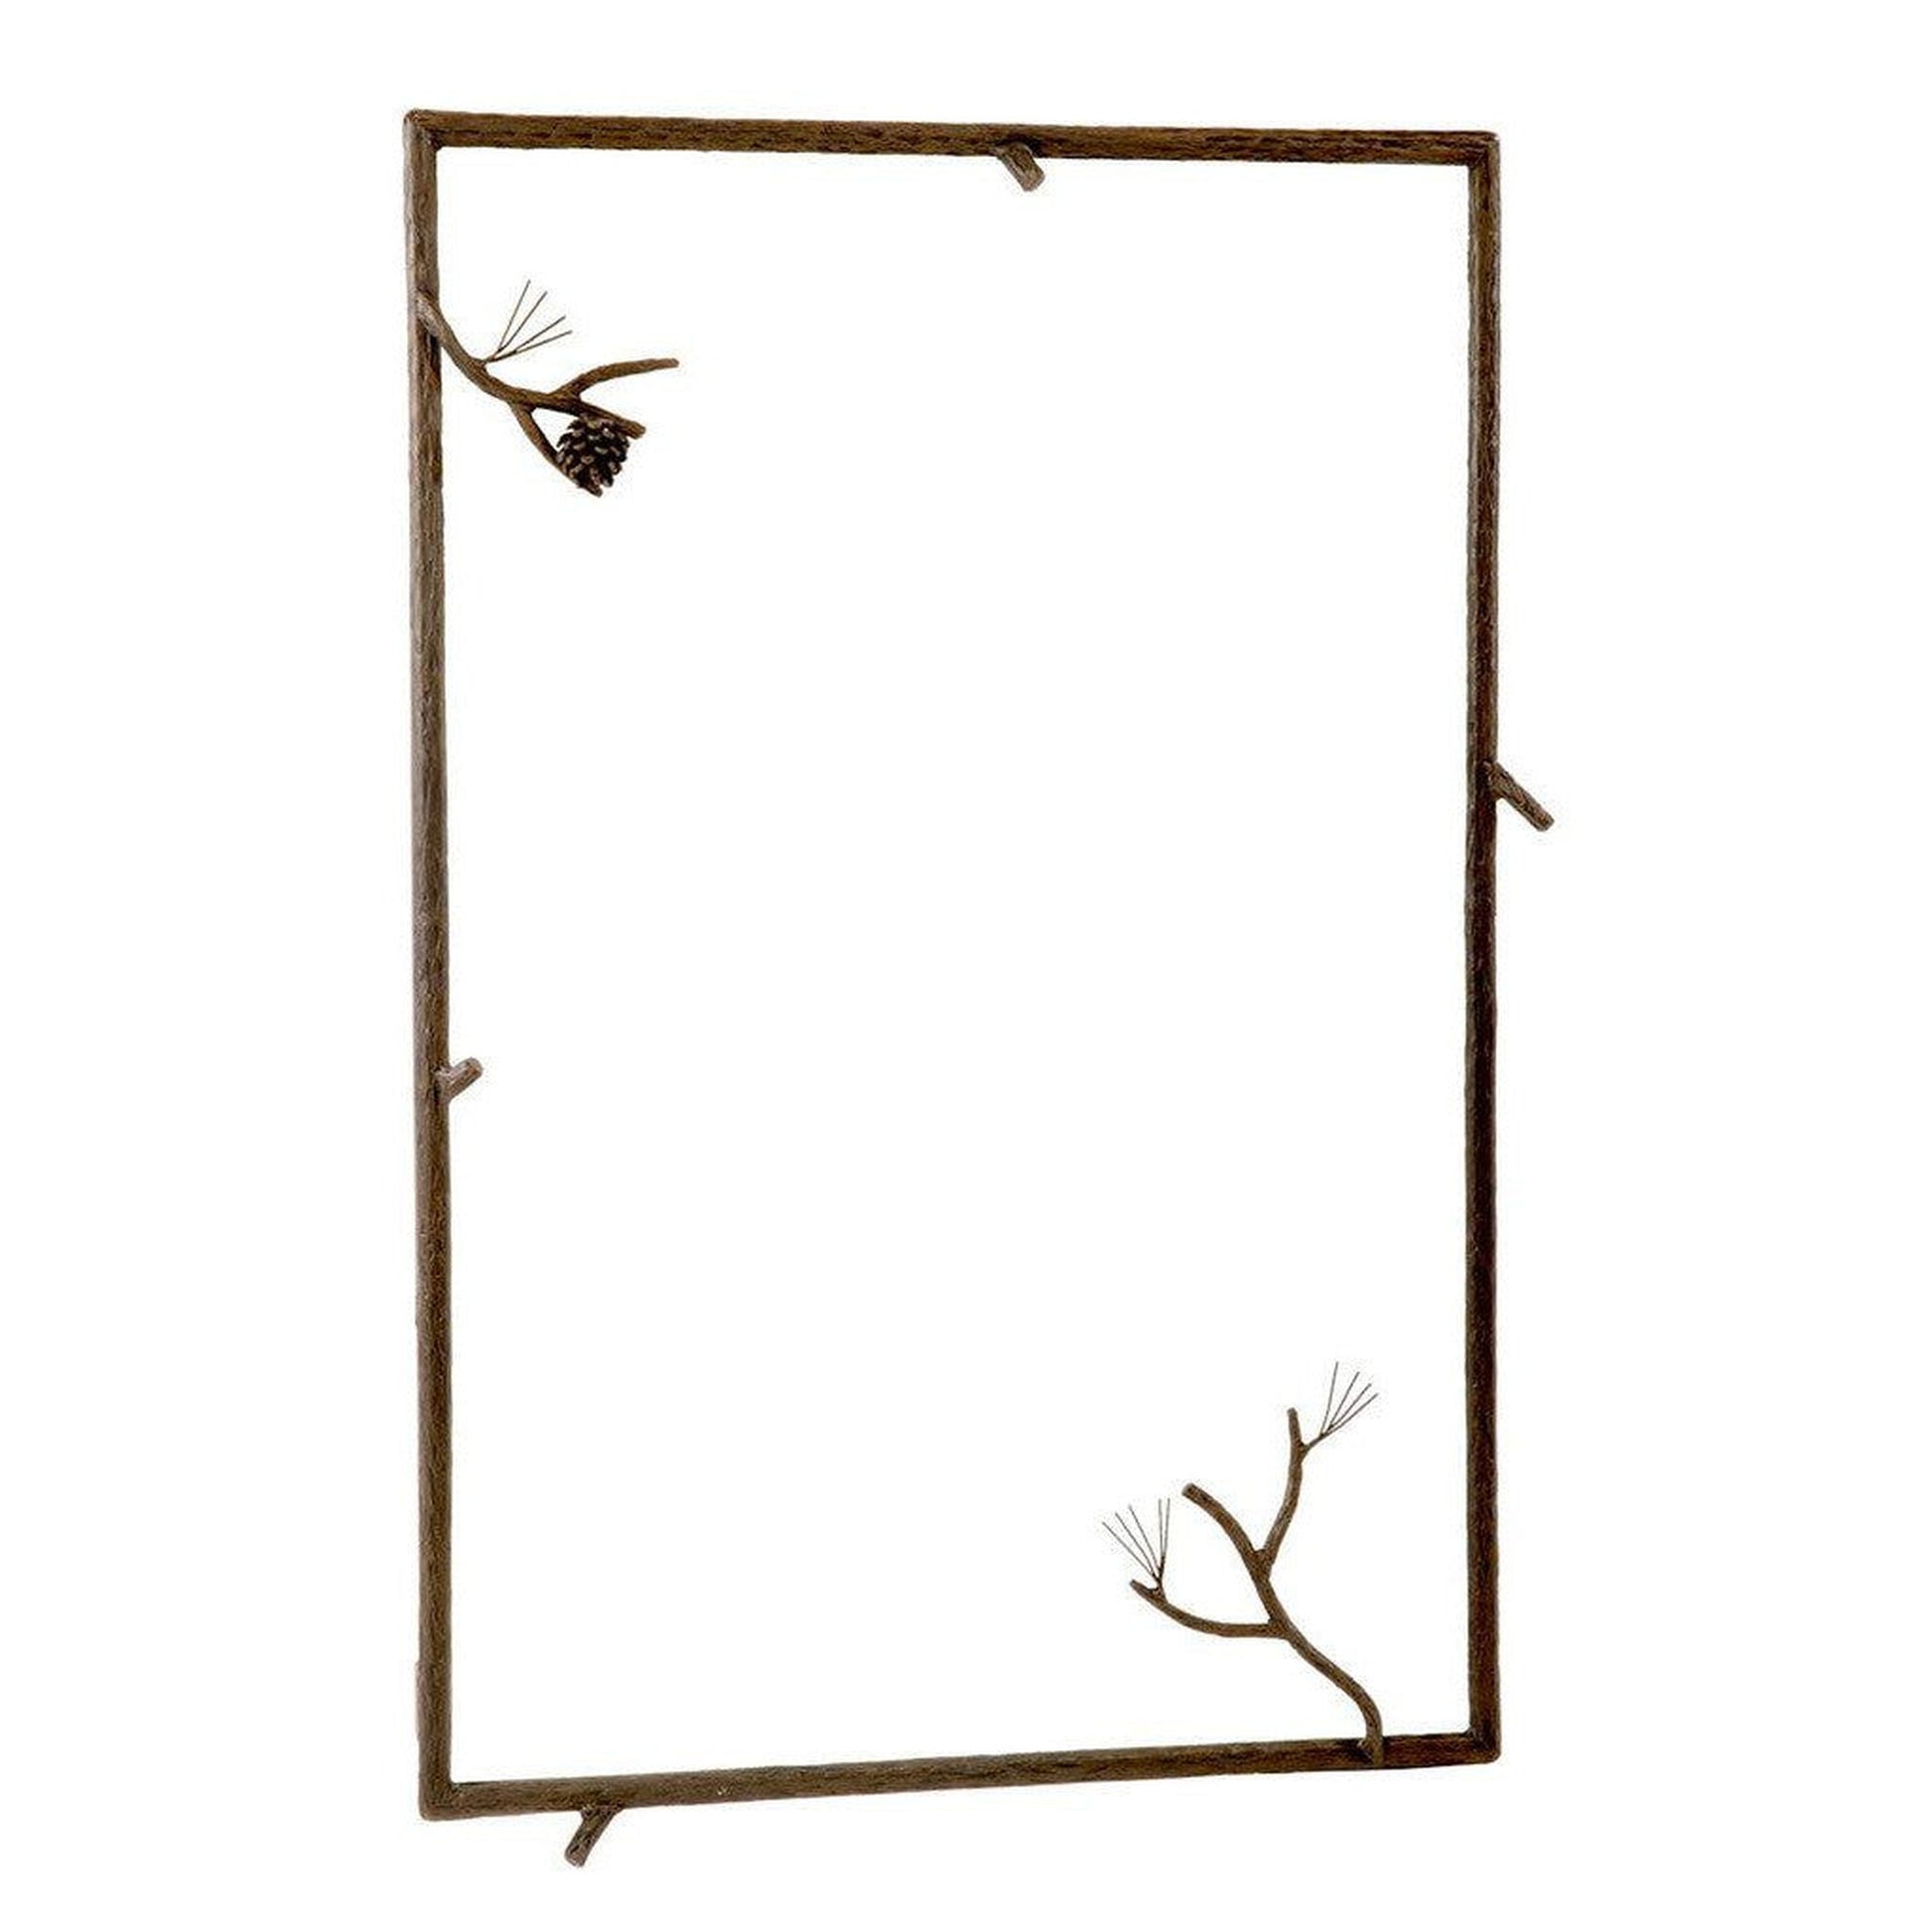 Stone County Ironworks Pine 25" x 21" Small Hand Rubbed Bronze Iron Wall Mirror With Copper Iron Accent